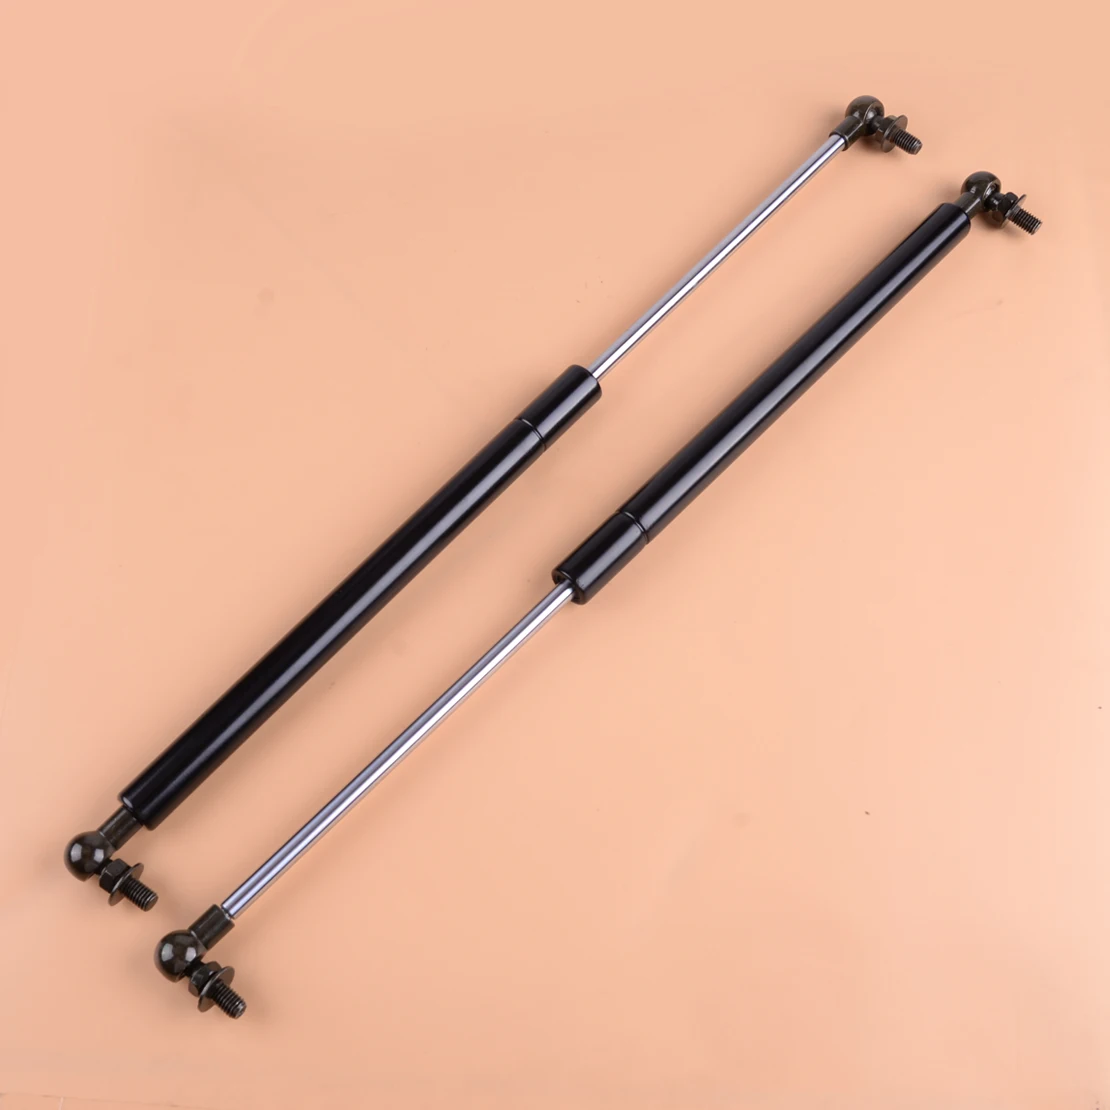 2 Front Hood Lift Support Strut Gas Spring 5344039245 5345039225 Fit For Toyota Lexus GX470 2003 2004 2005 2006 2007 2008 2009